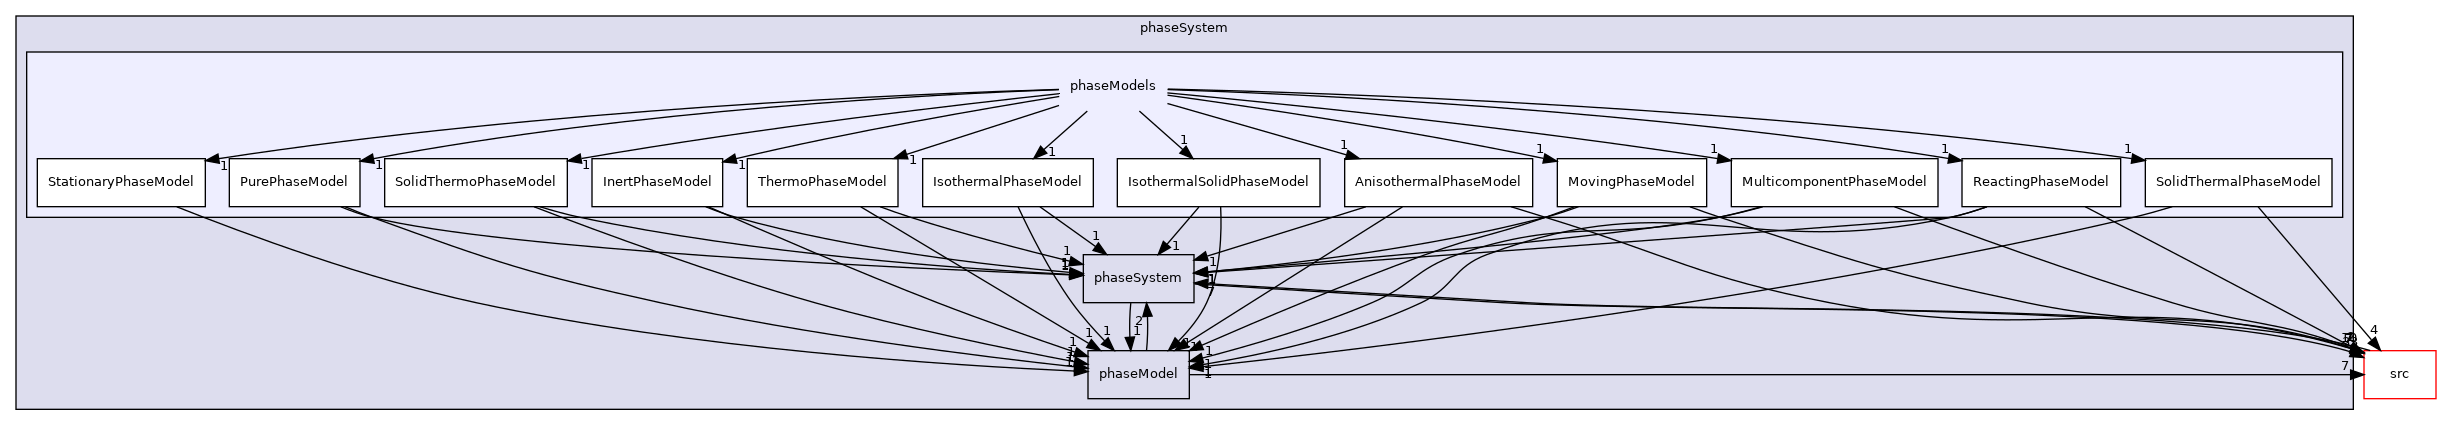 applications/modules/multiphaseEuler/phaseSystem/phaseModels